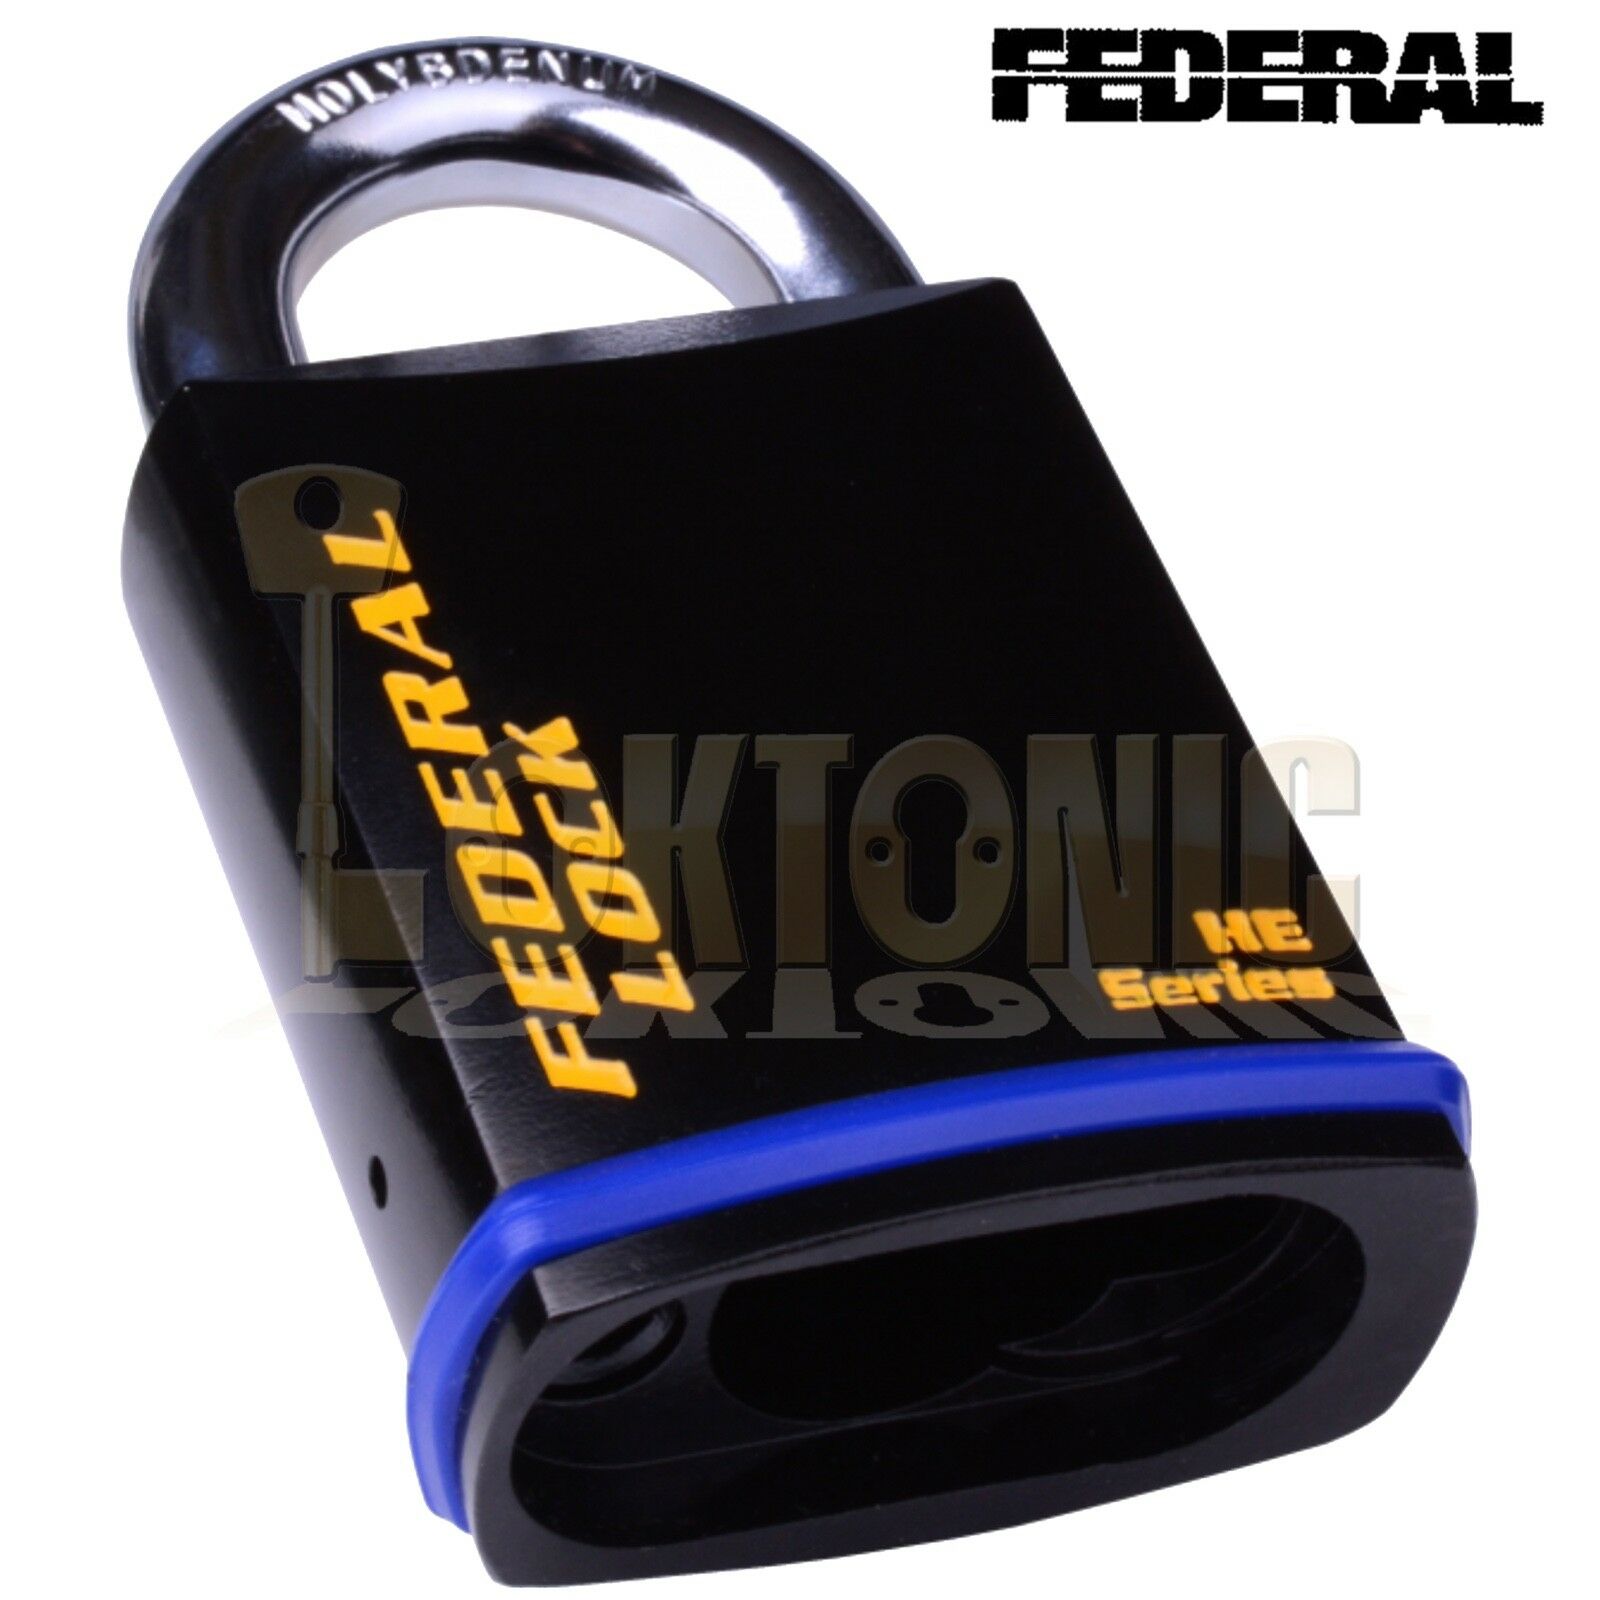 Federal FD740EUX Sold Secure GOLD CEN 5 Body Padlock To Suit Half Euro Cylinder